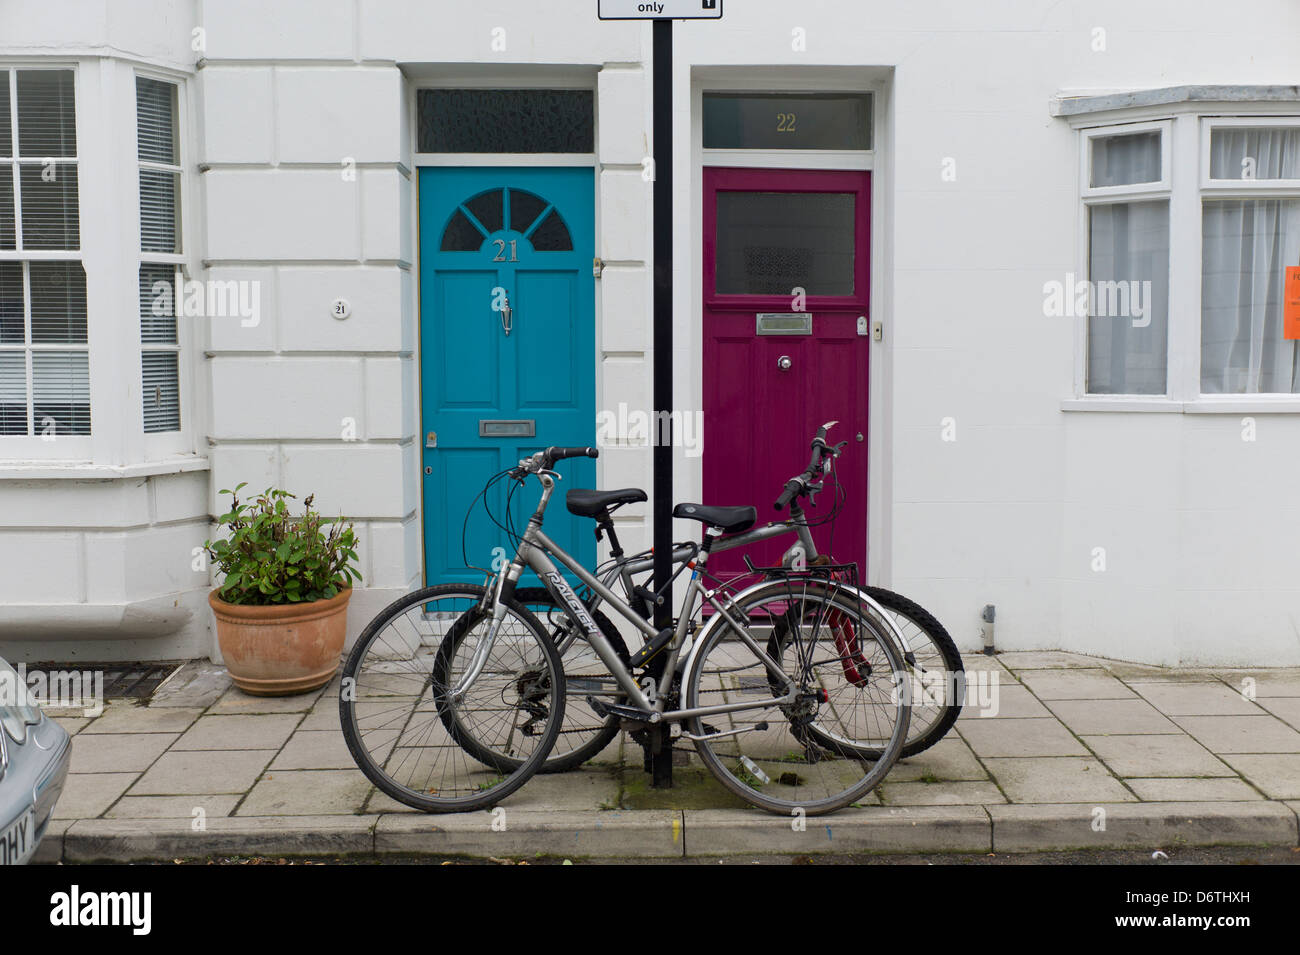 Bicycles chained to post, Brighton, UK Stock Photo